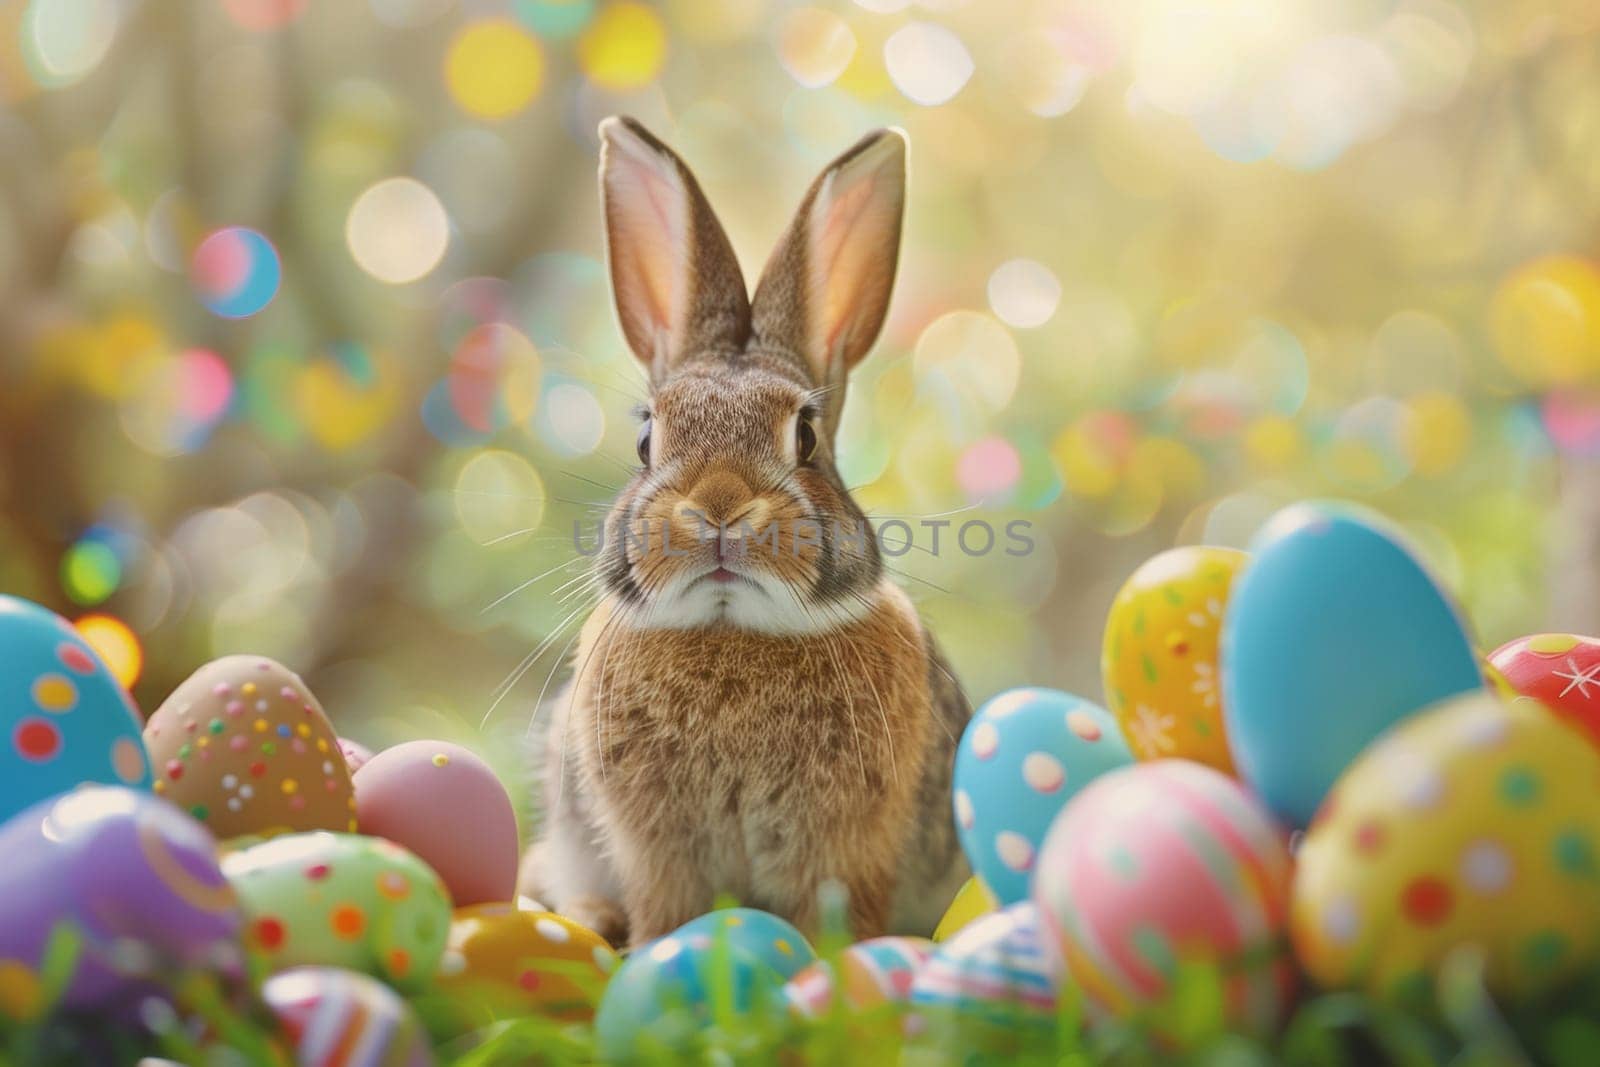 A rabbit is standing in a field of Easter eggs. The eggs are scattered around the rabbit, with some closer to it and others further away. The scene is bright and cheerful